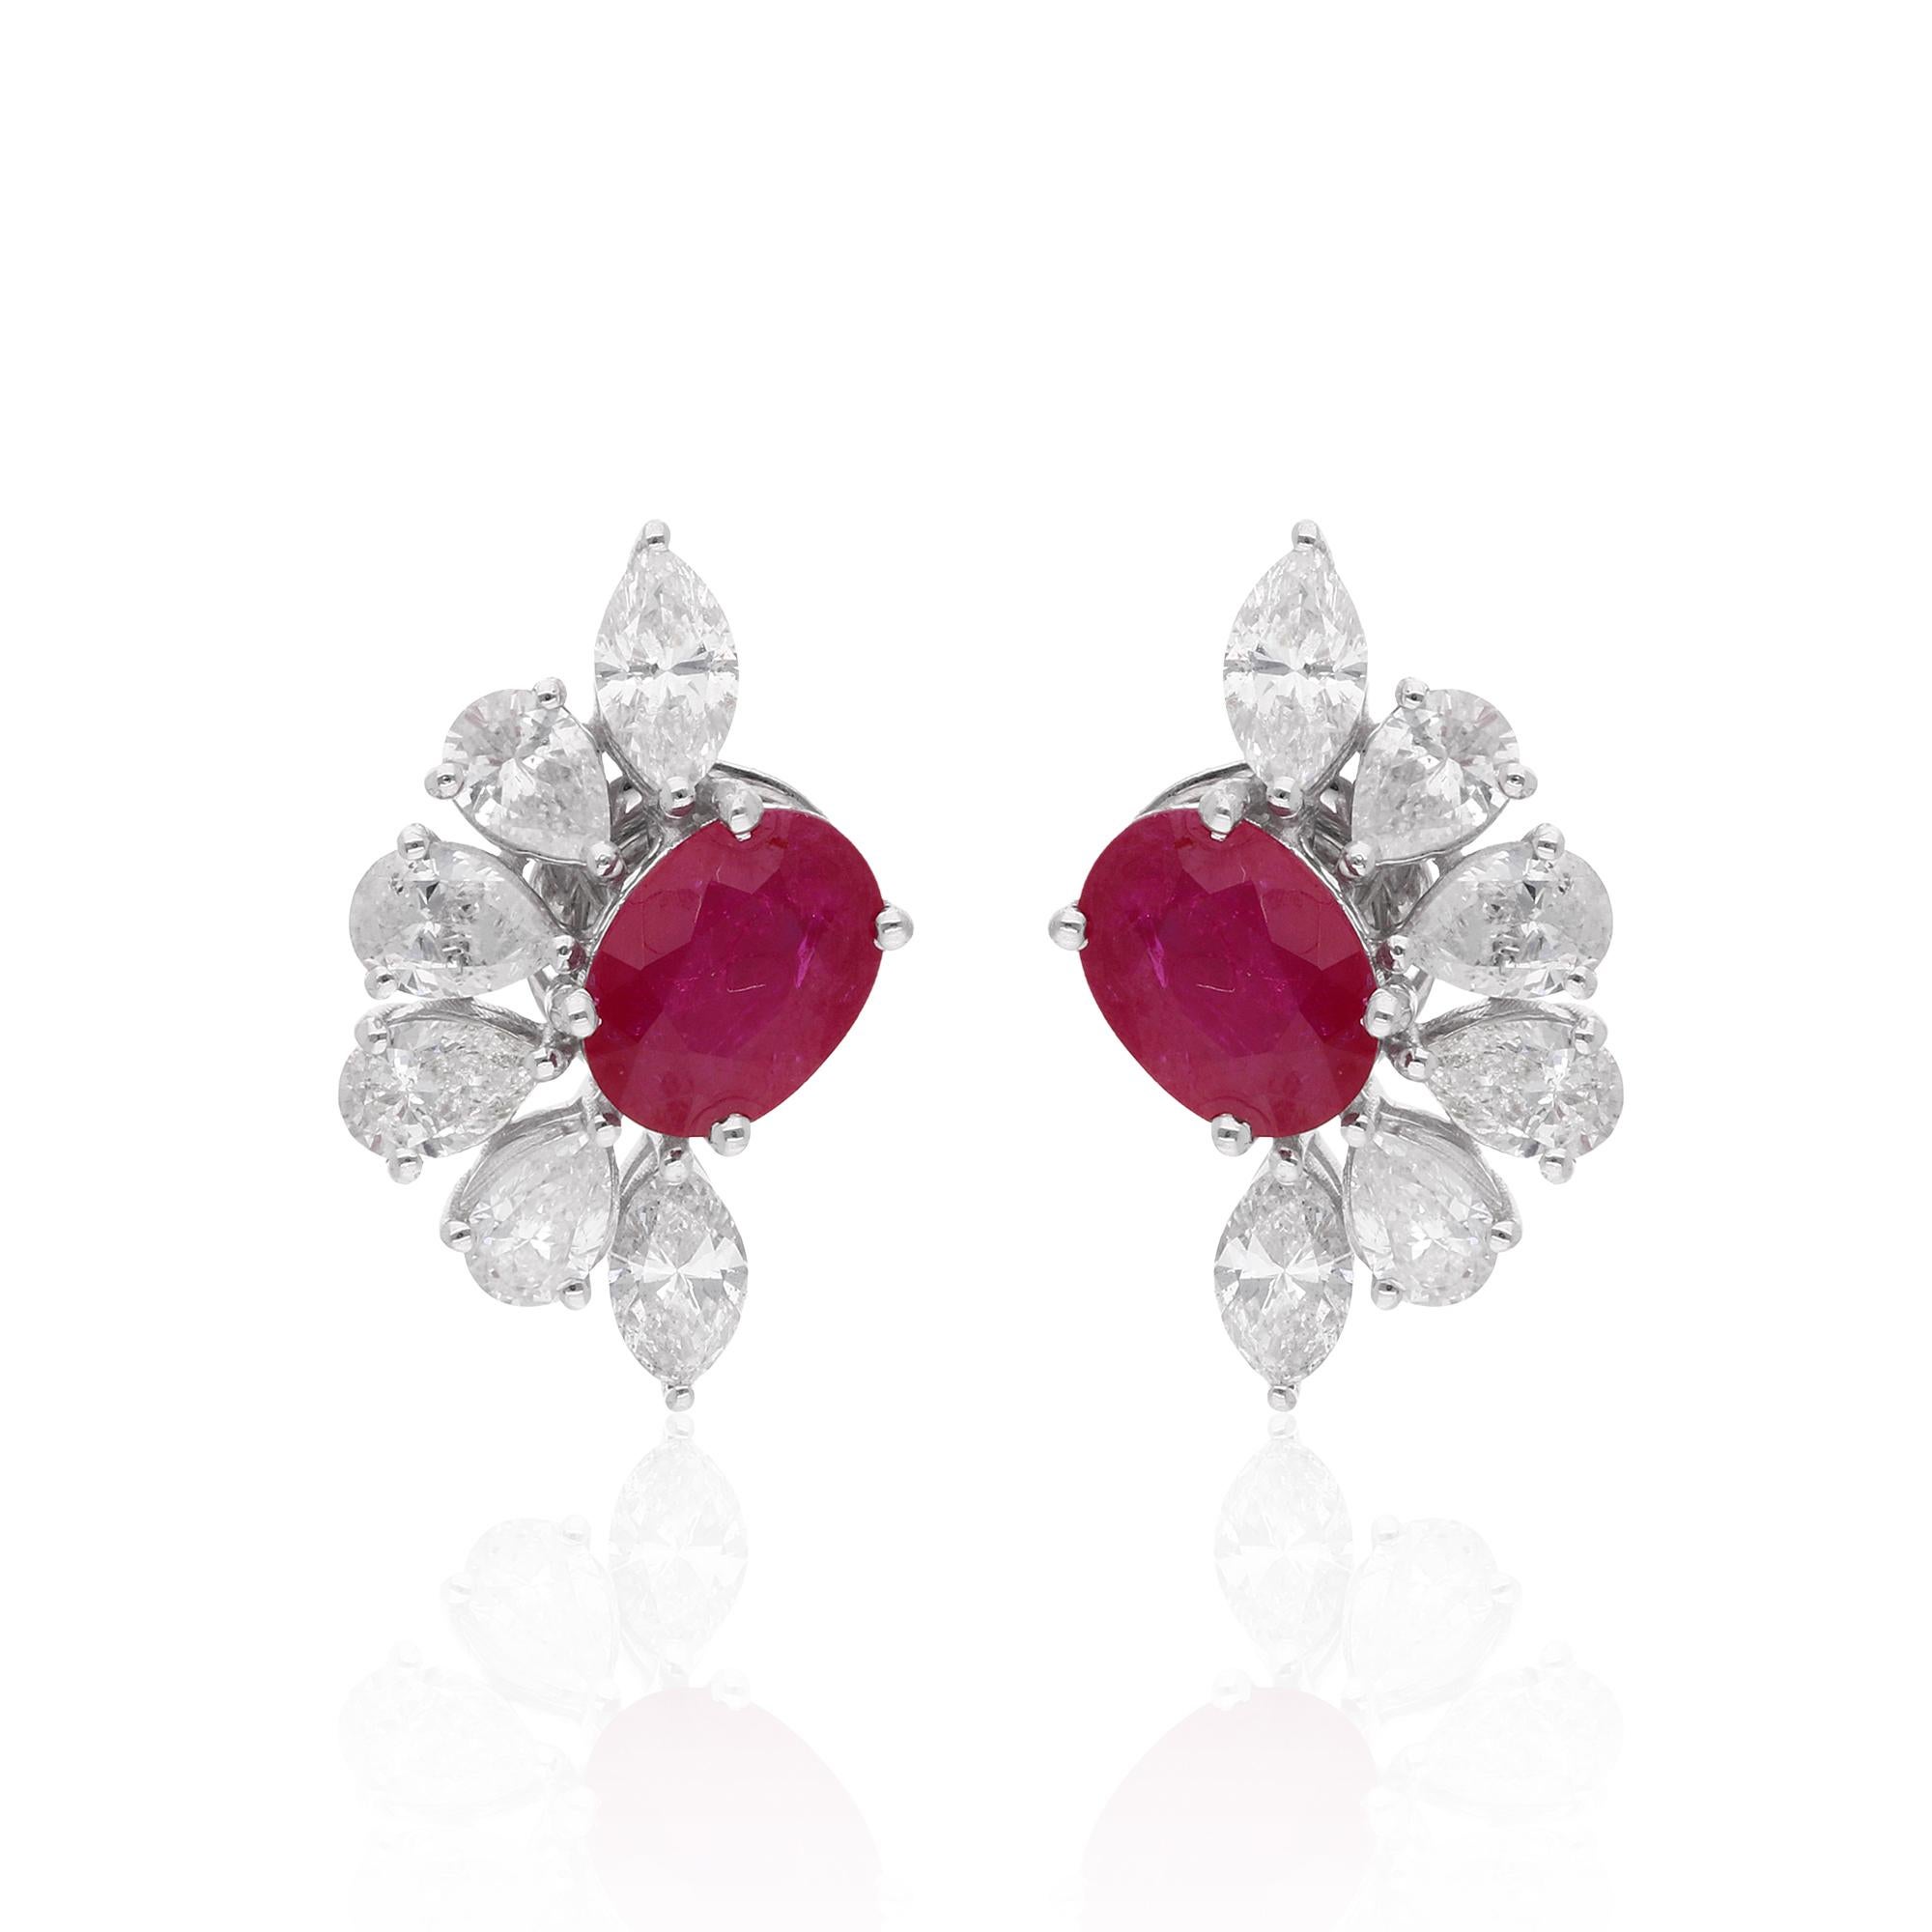 These beautiful Stud Earrings are a timeless and elegant accessory that will add a touch of sophistication to any outfit. Crafted from 18k solid white gold , each earring features a stunning Natural Ruby that is securely prong-set in a classic